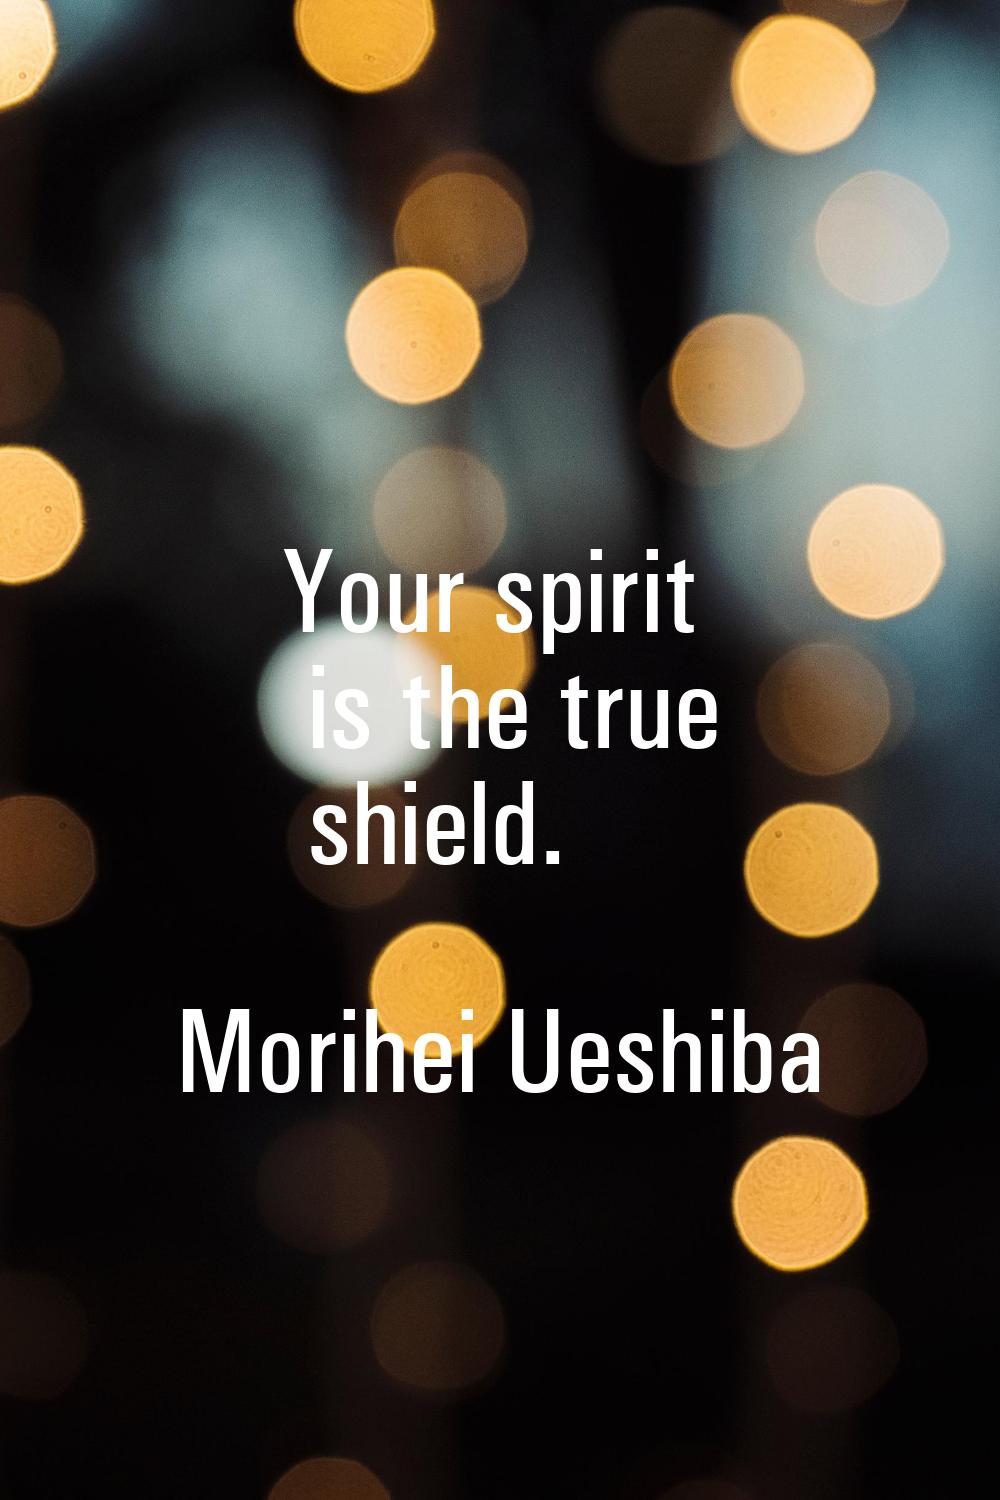 Your spirit is the true shield.